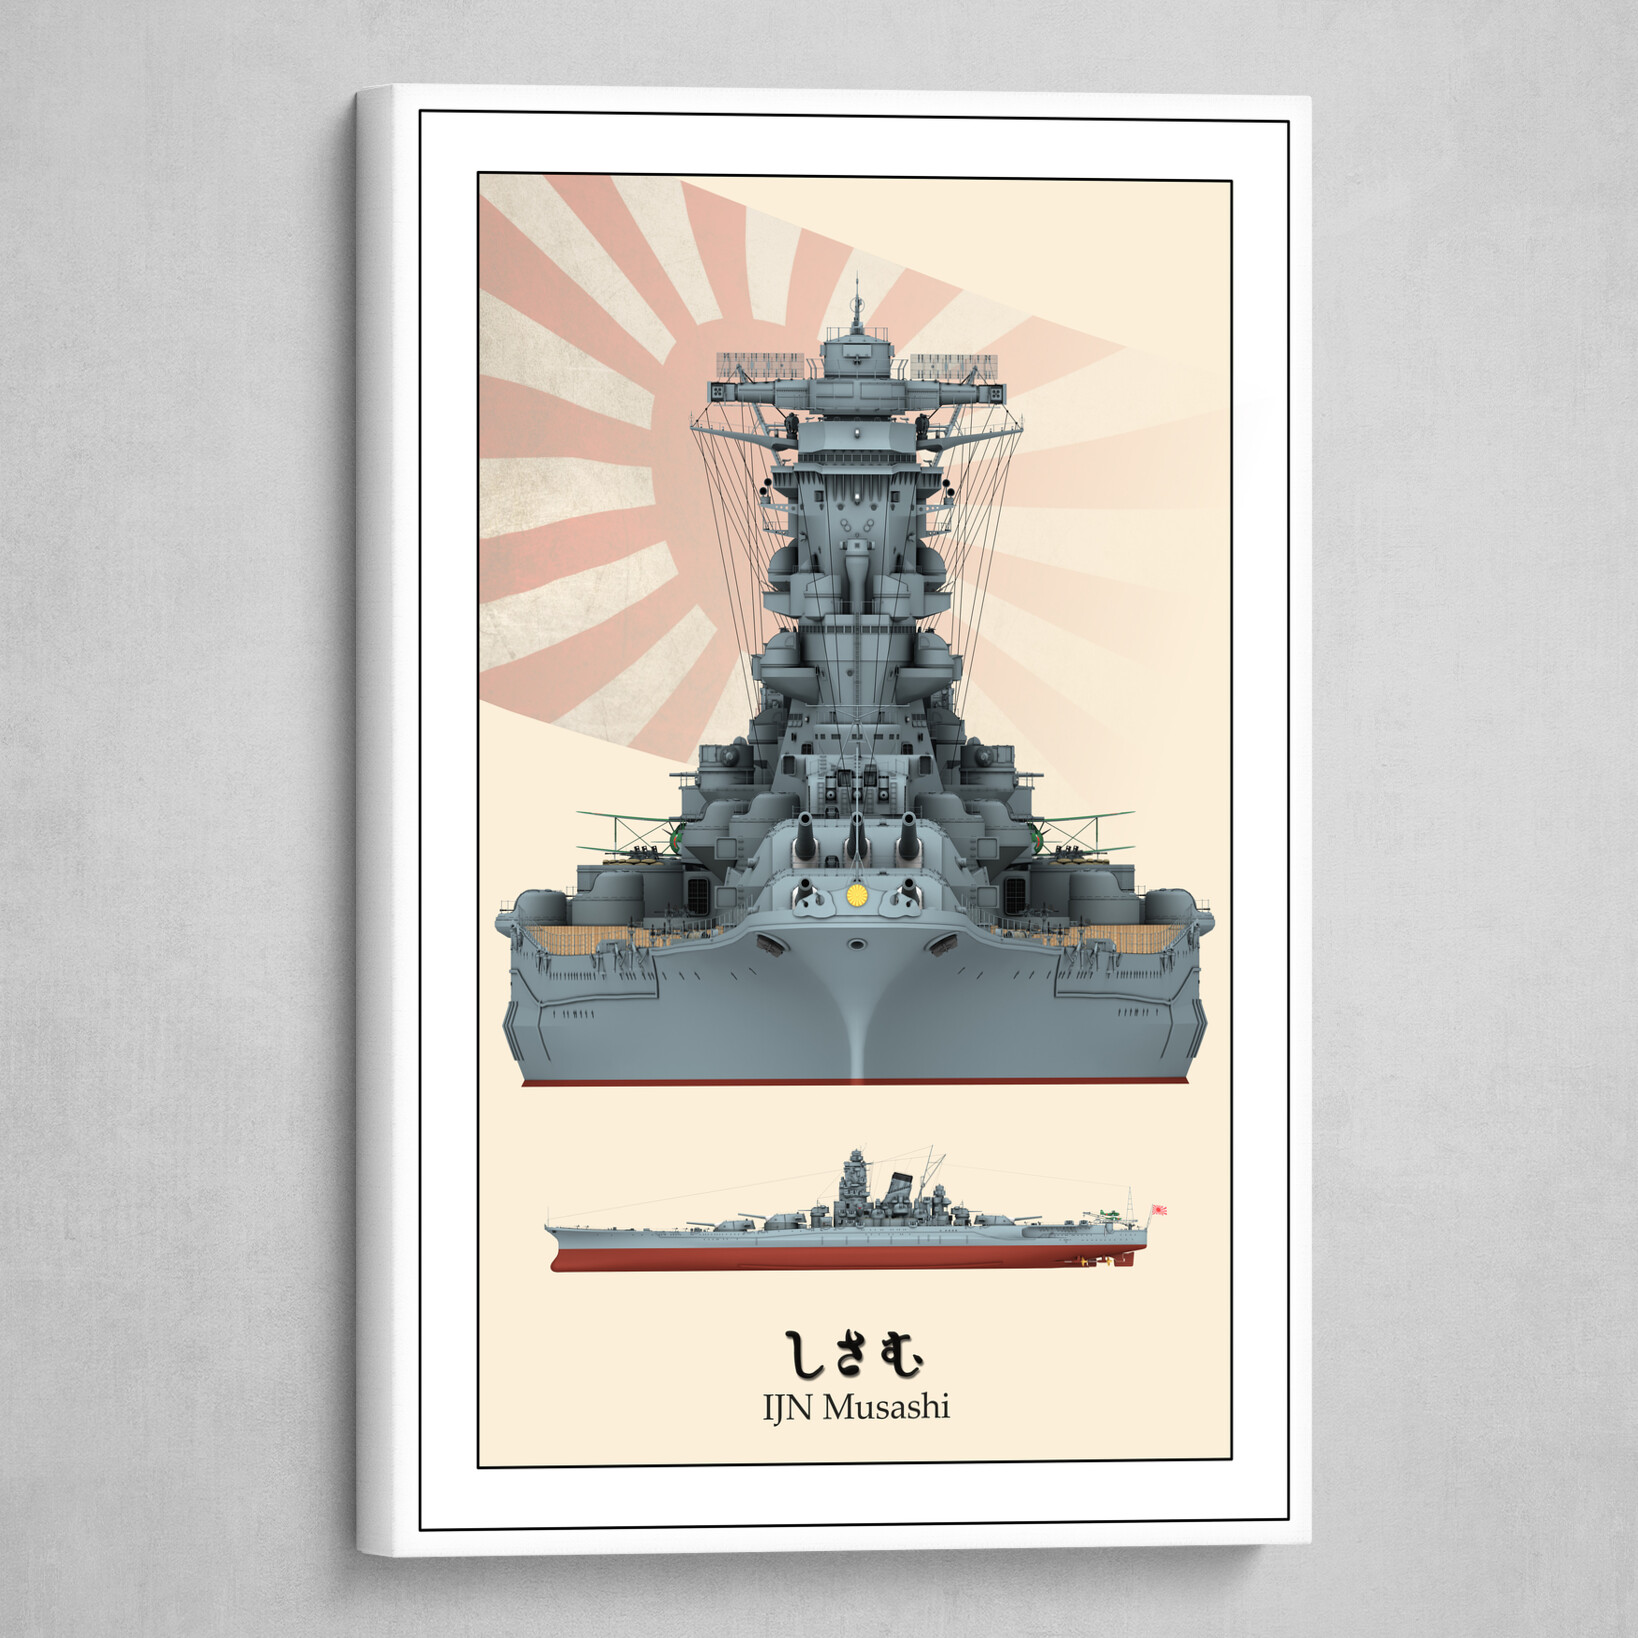 IJN Musashi - front and portside view